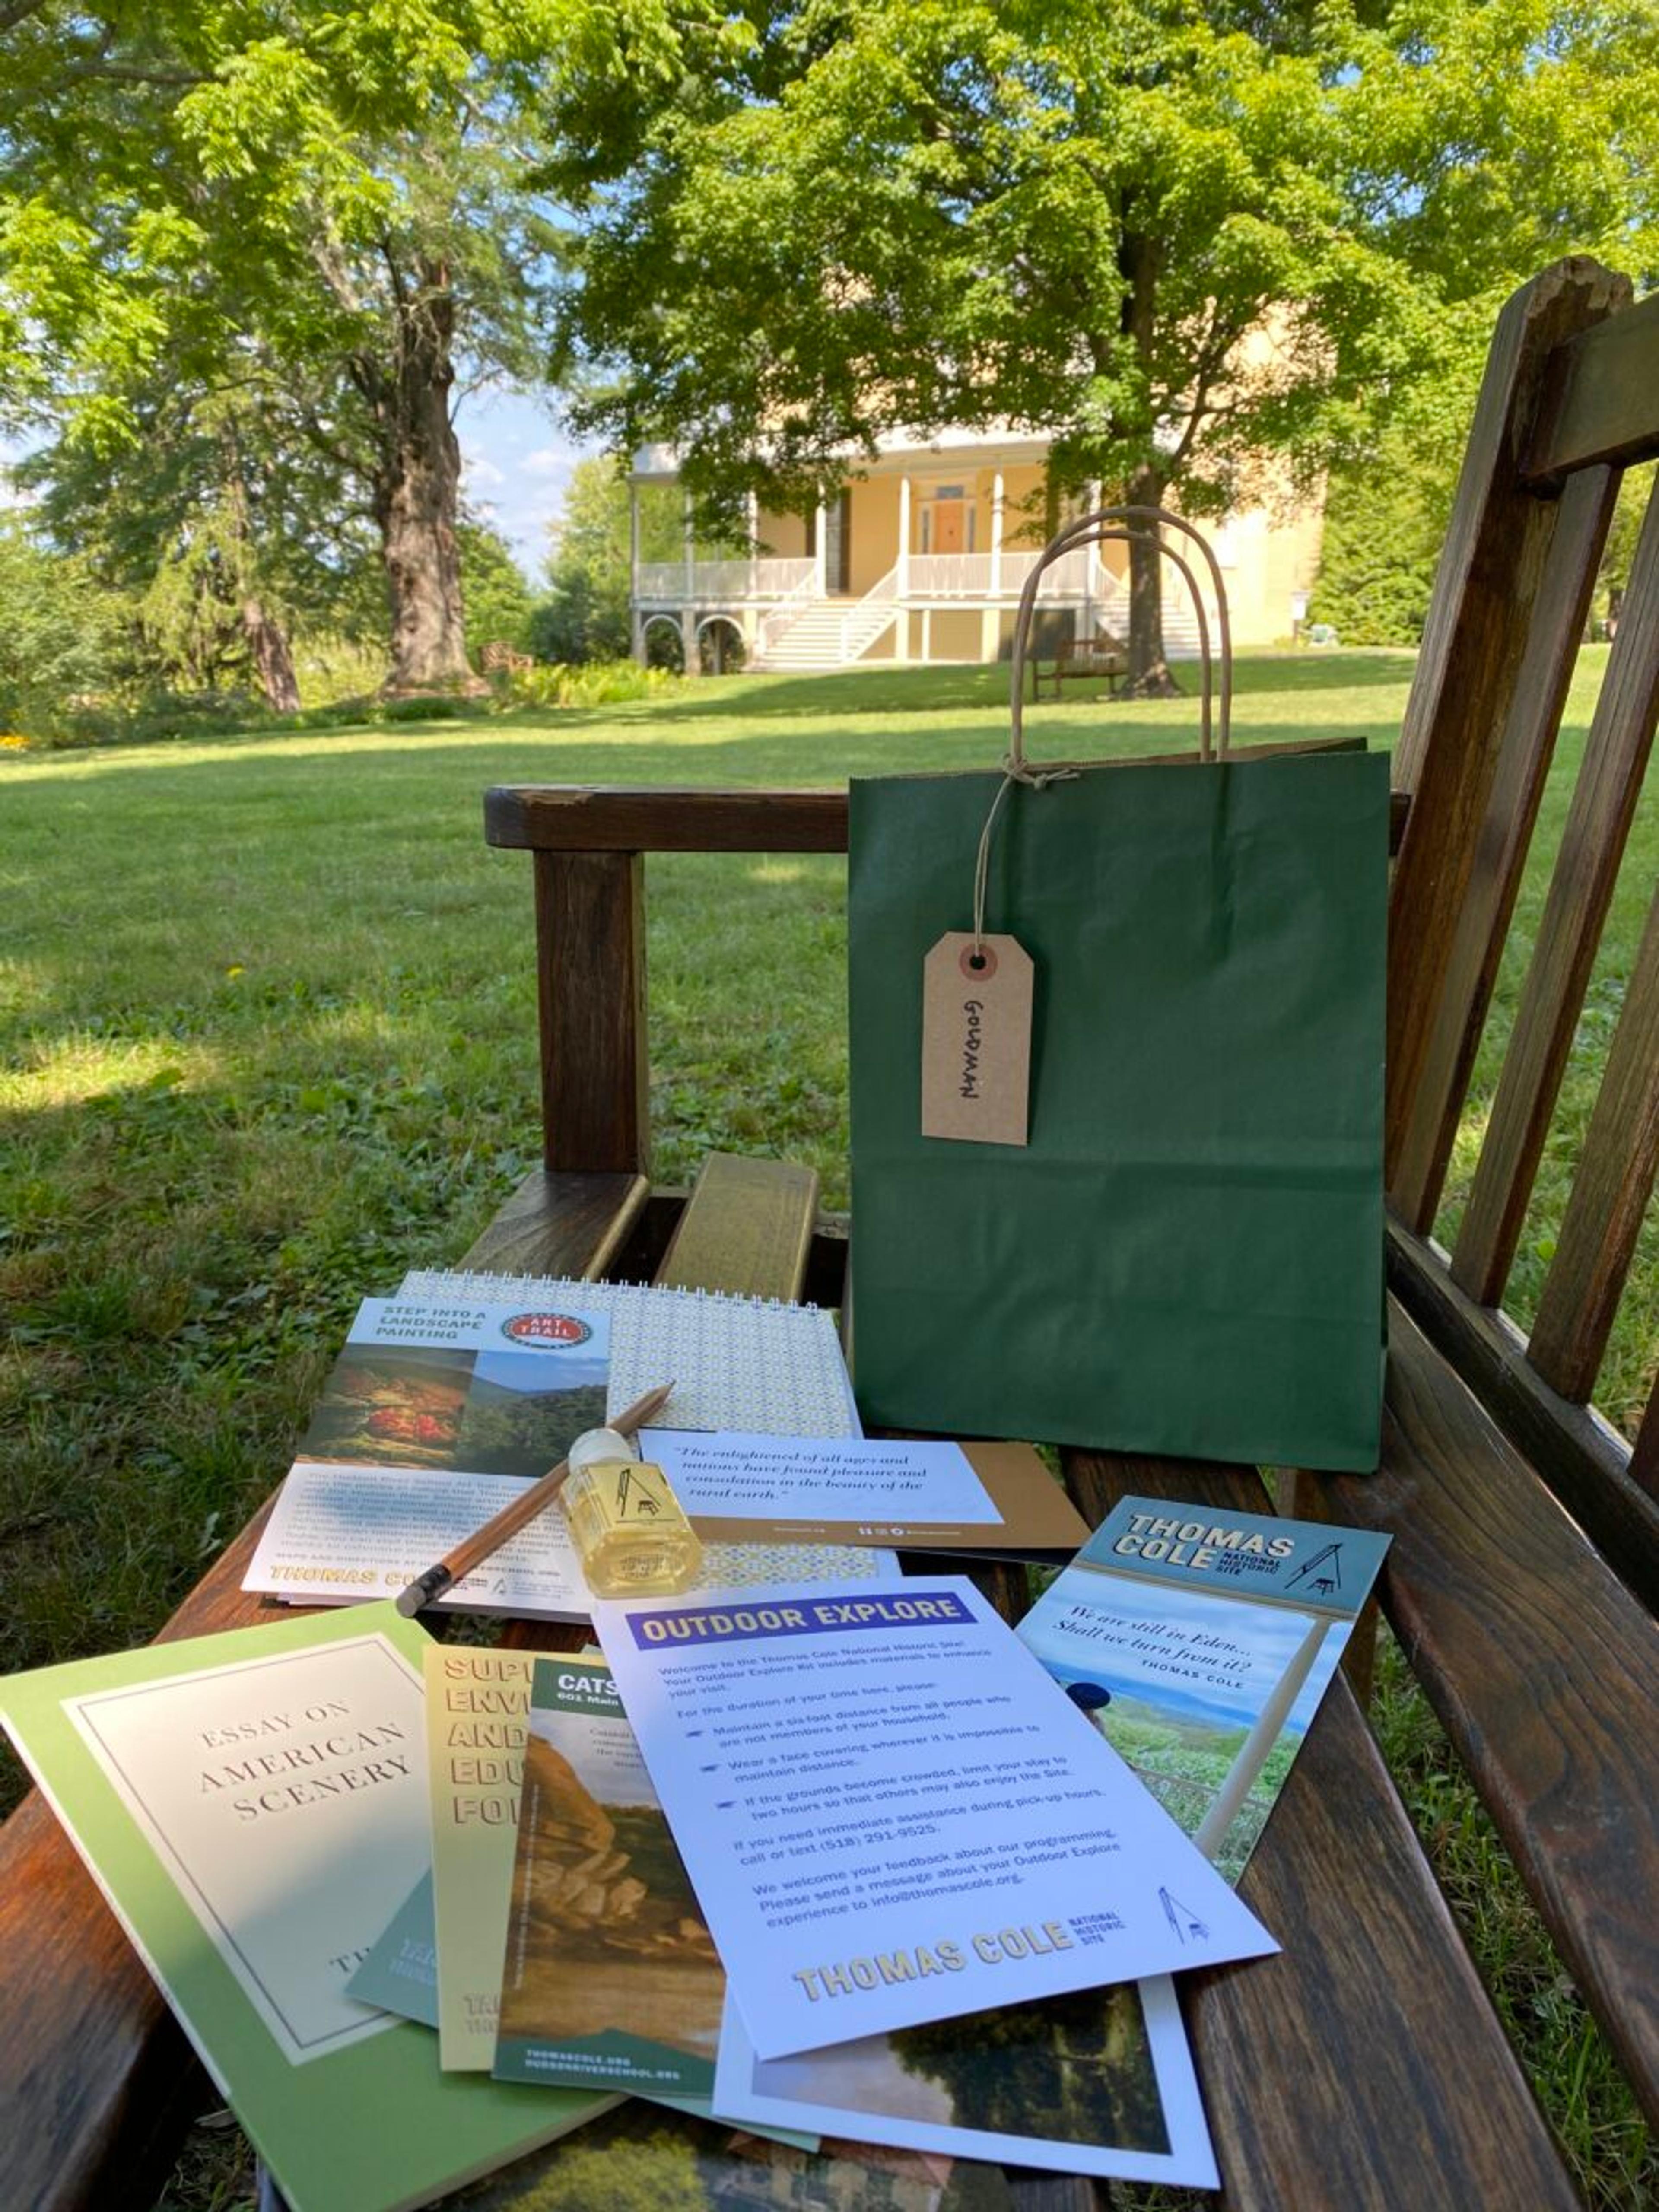 Thomas Cole National Historic Site lawn chair with programming materials